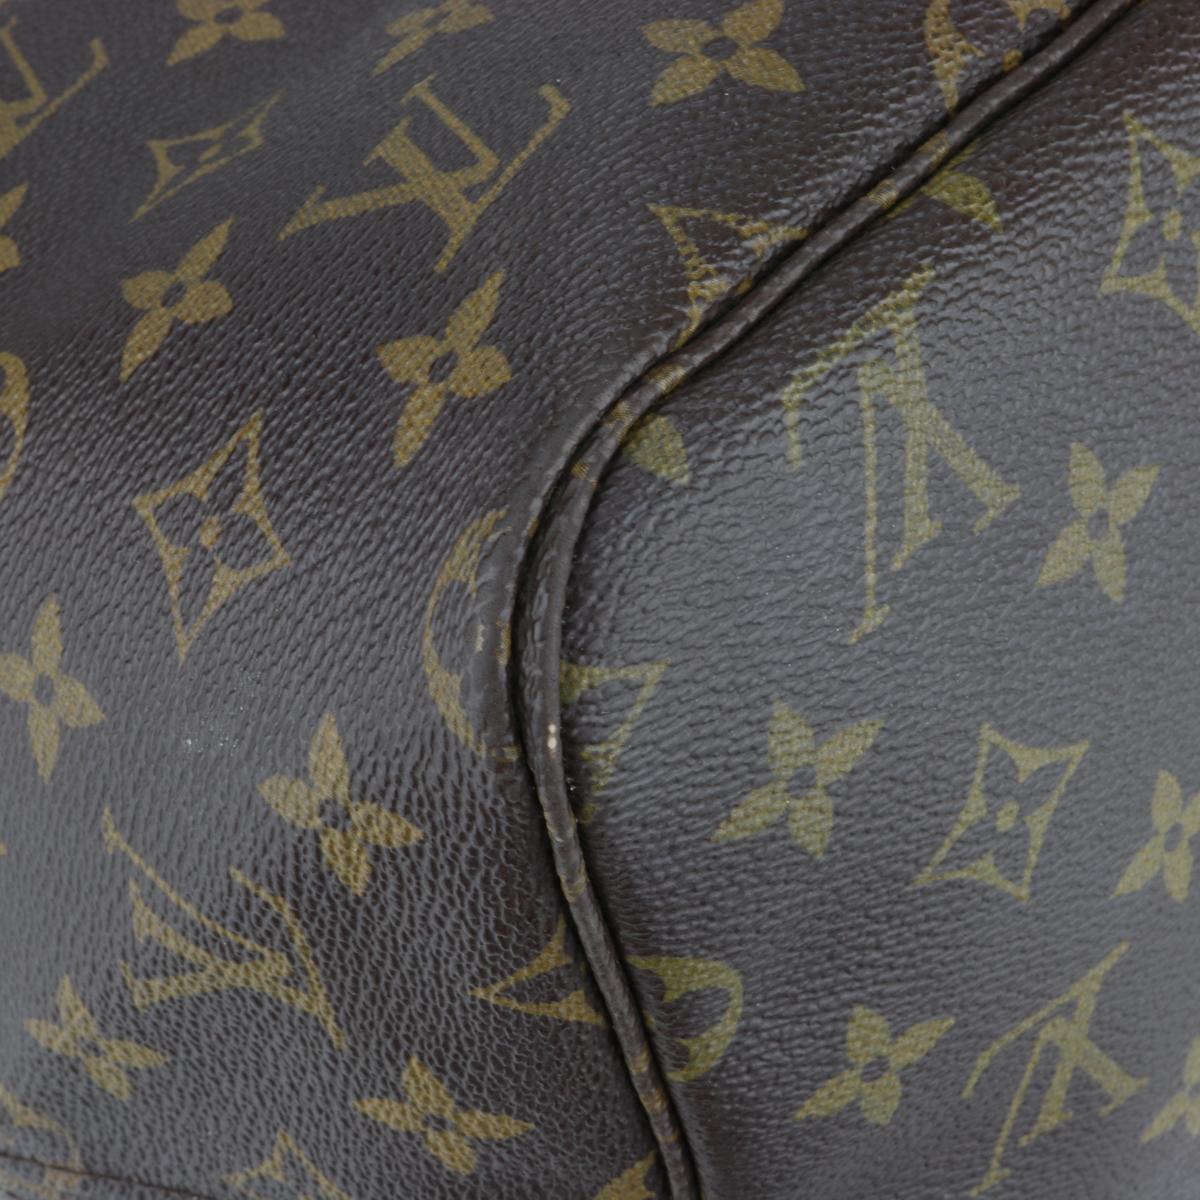 Louis Vuitton Neverfull GM Bag in Monogram with Beige Interior 2007 6